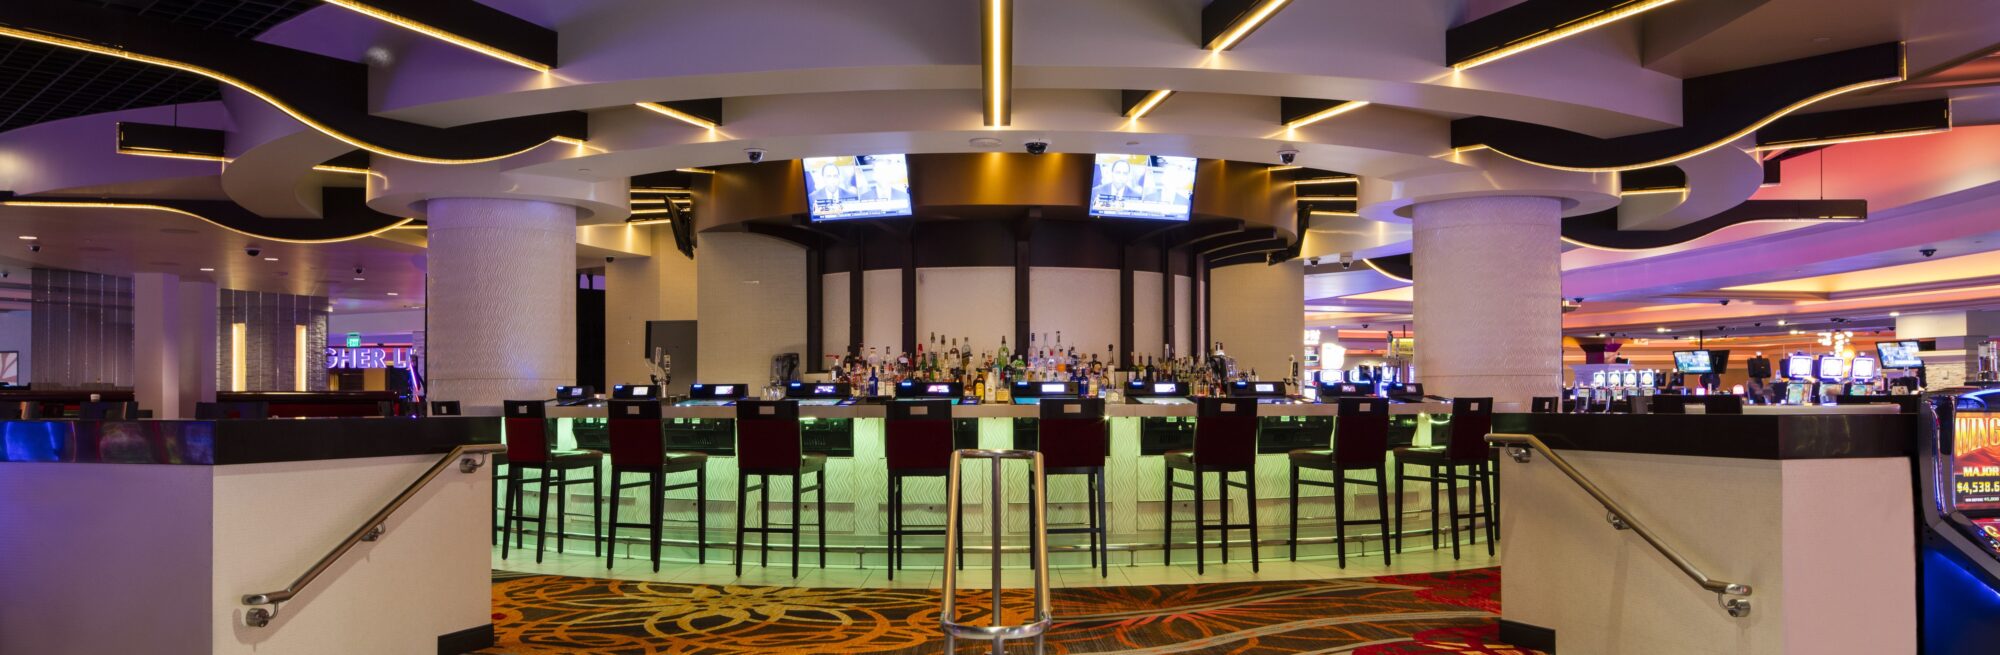 Glenn Rieder fabricated and installed custom interior finishes of their restaurant venues for the Chumash Casino located in Santa Ynez CA